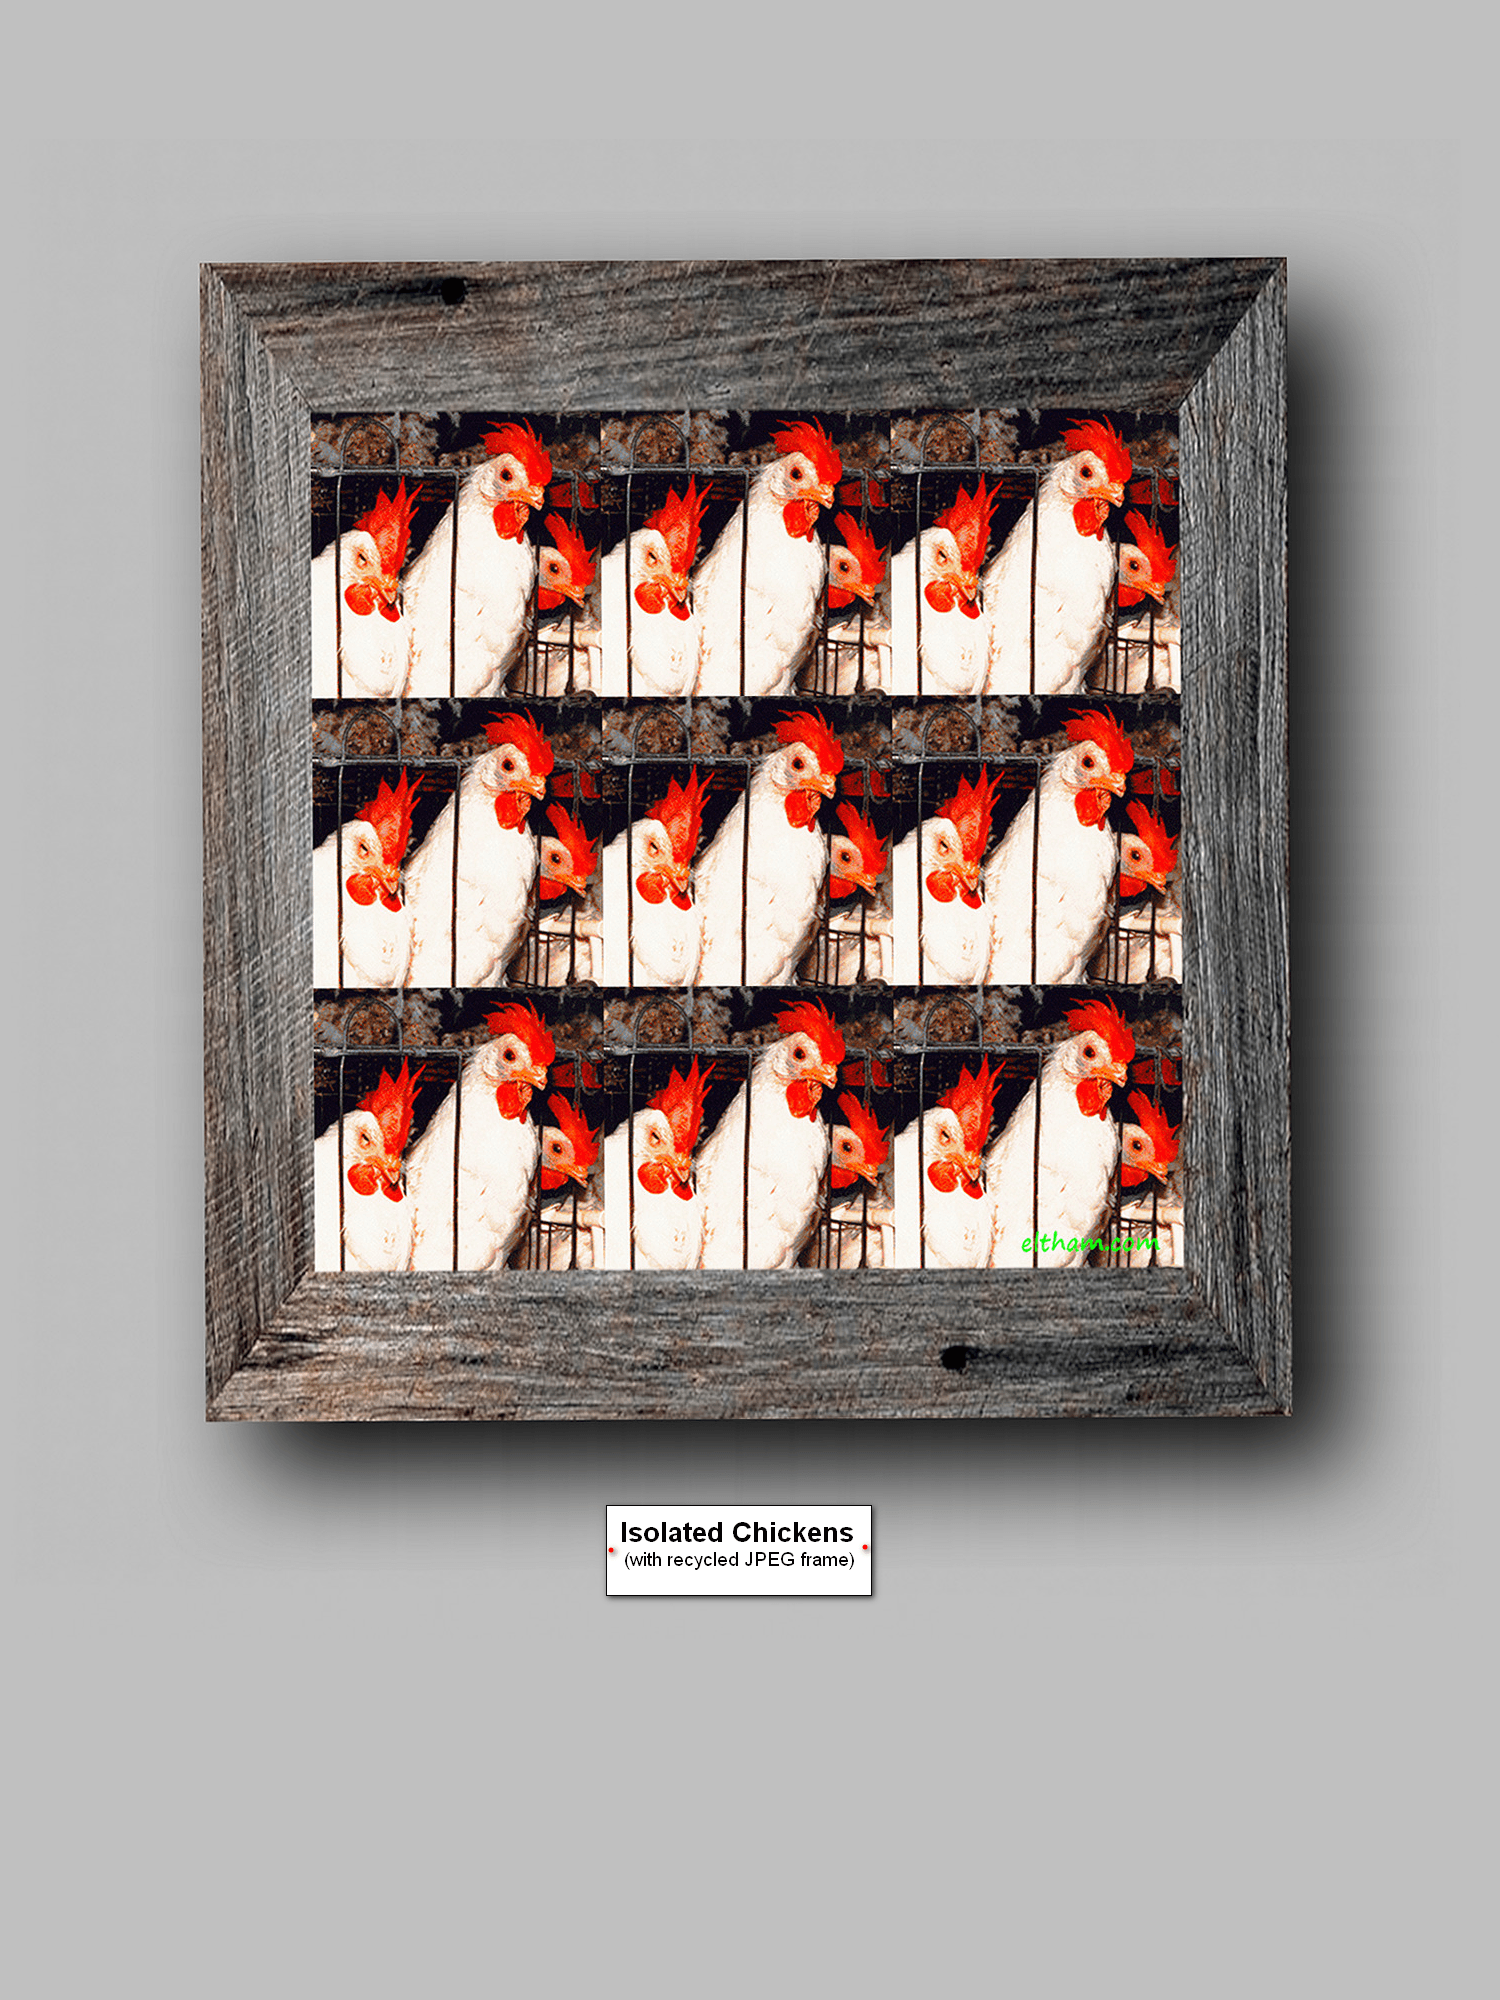 Isolated Chickens (with recycled JPEG frame)